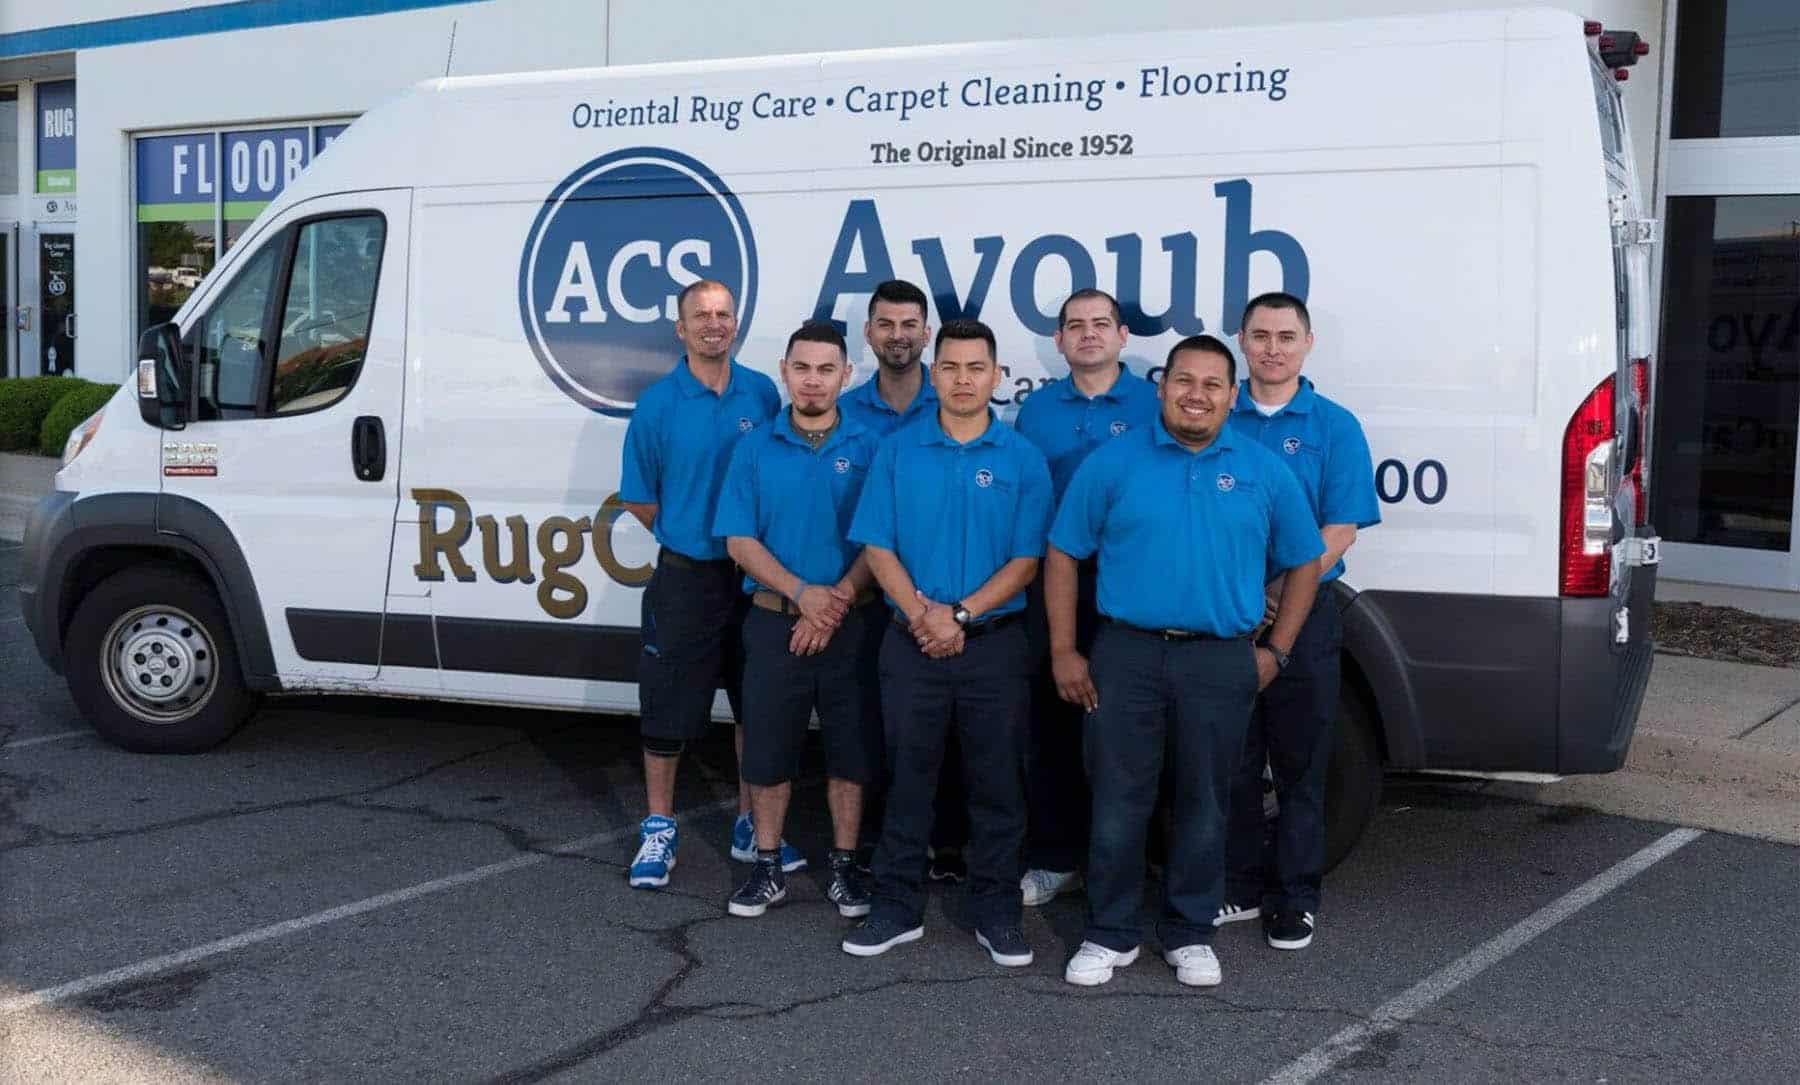 Carpet Cleaning Experts in Northern Virginia